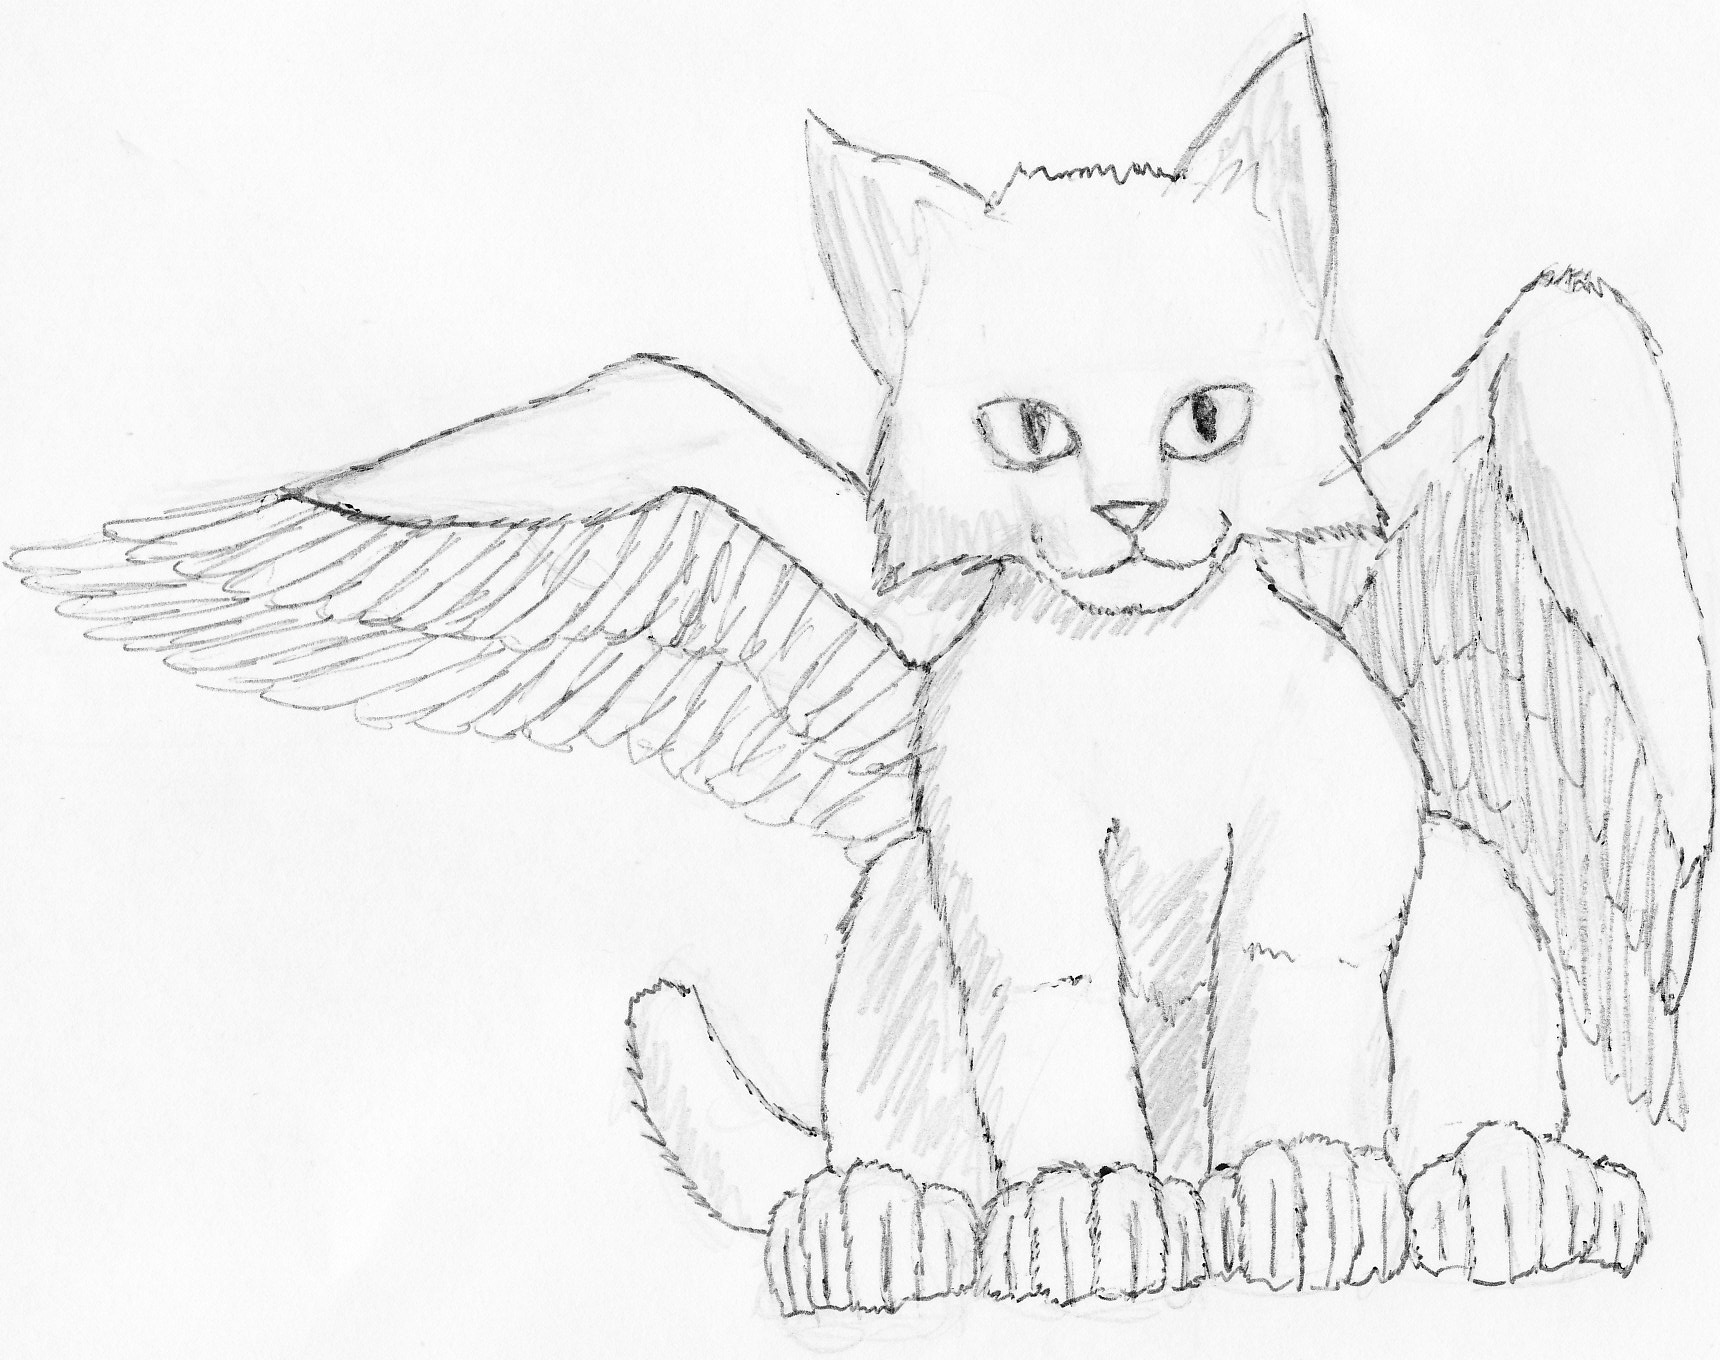 Angel Cat Coloring Pages at GetDrawings.com | Free for personal use